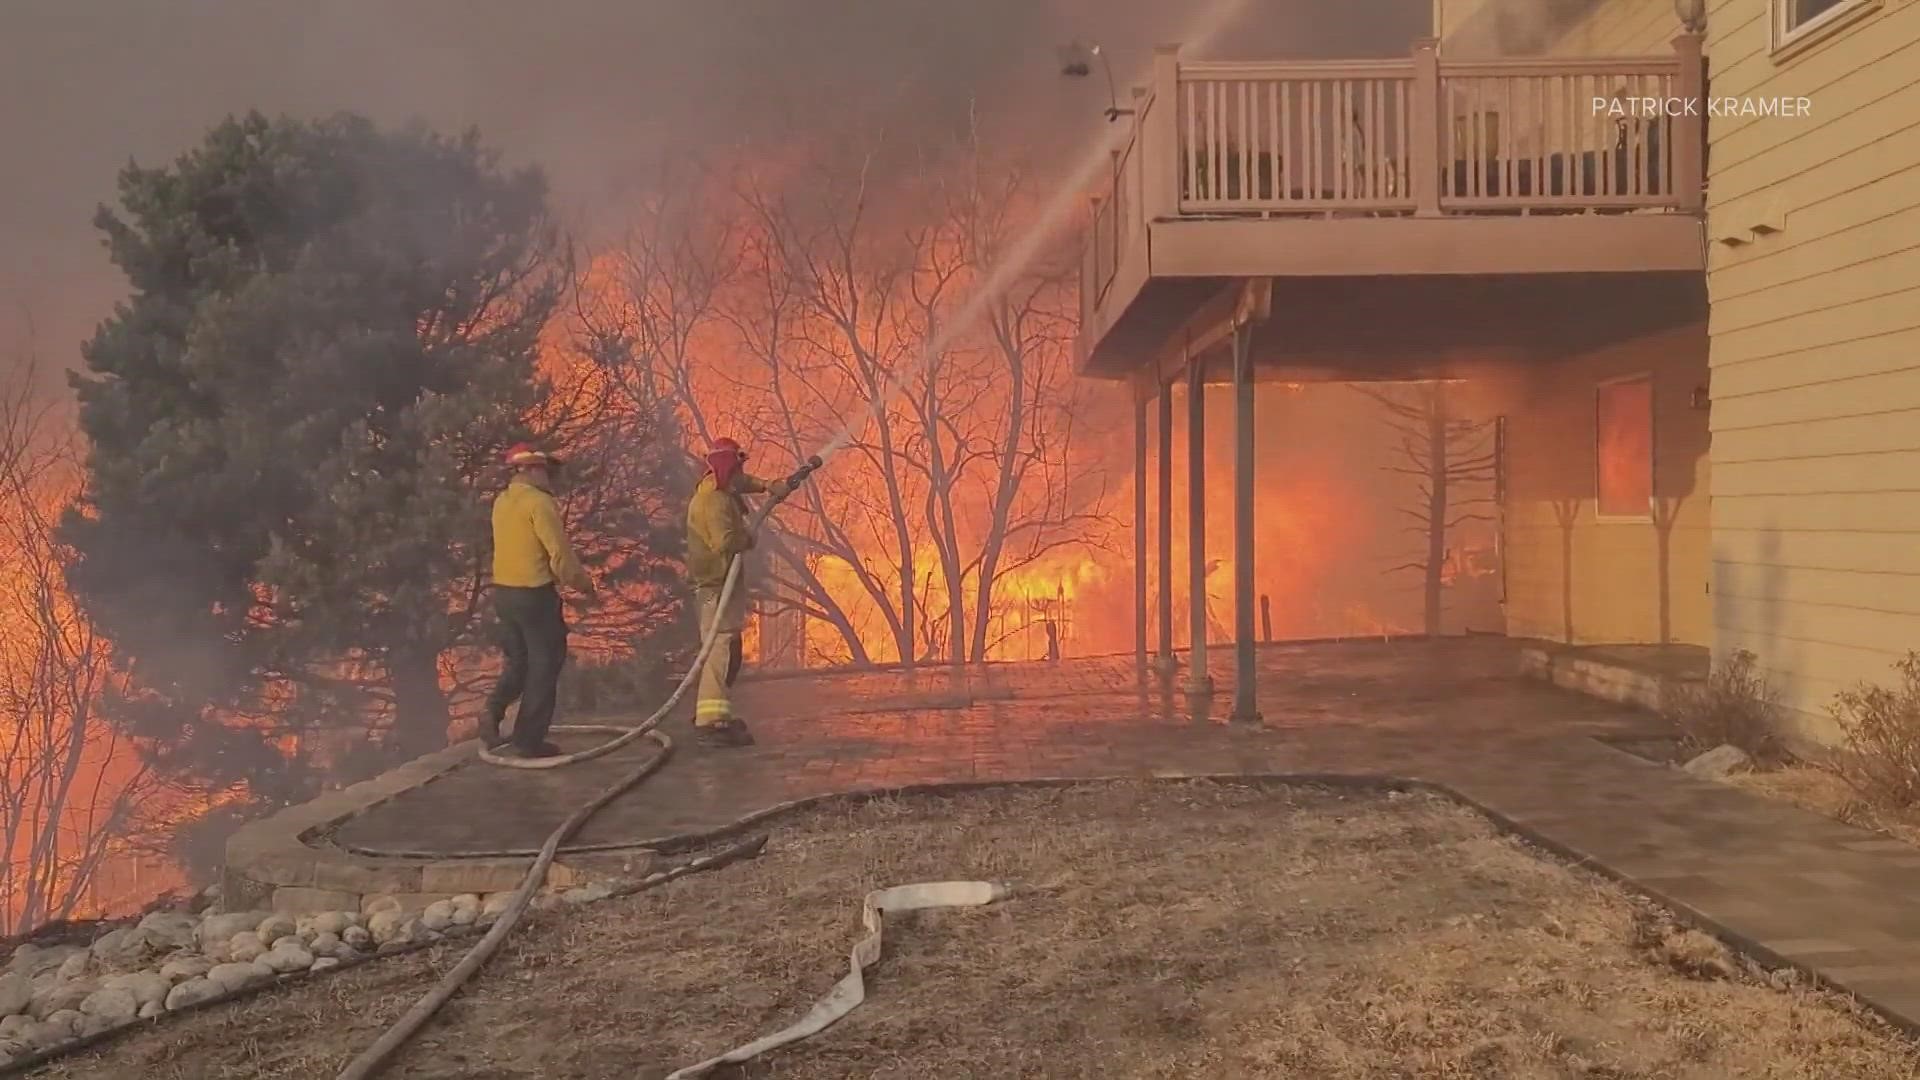 Patrick Kramer is a firefighter with Longmont Fire who helped fight the Marshall Fire in Louisville and Superior. He shot this video as he worked to fight the fire.